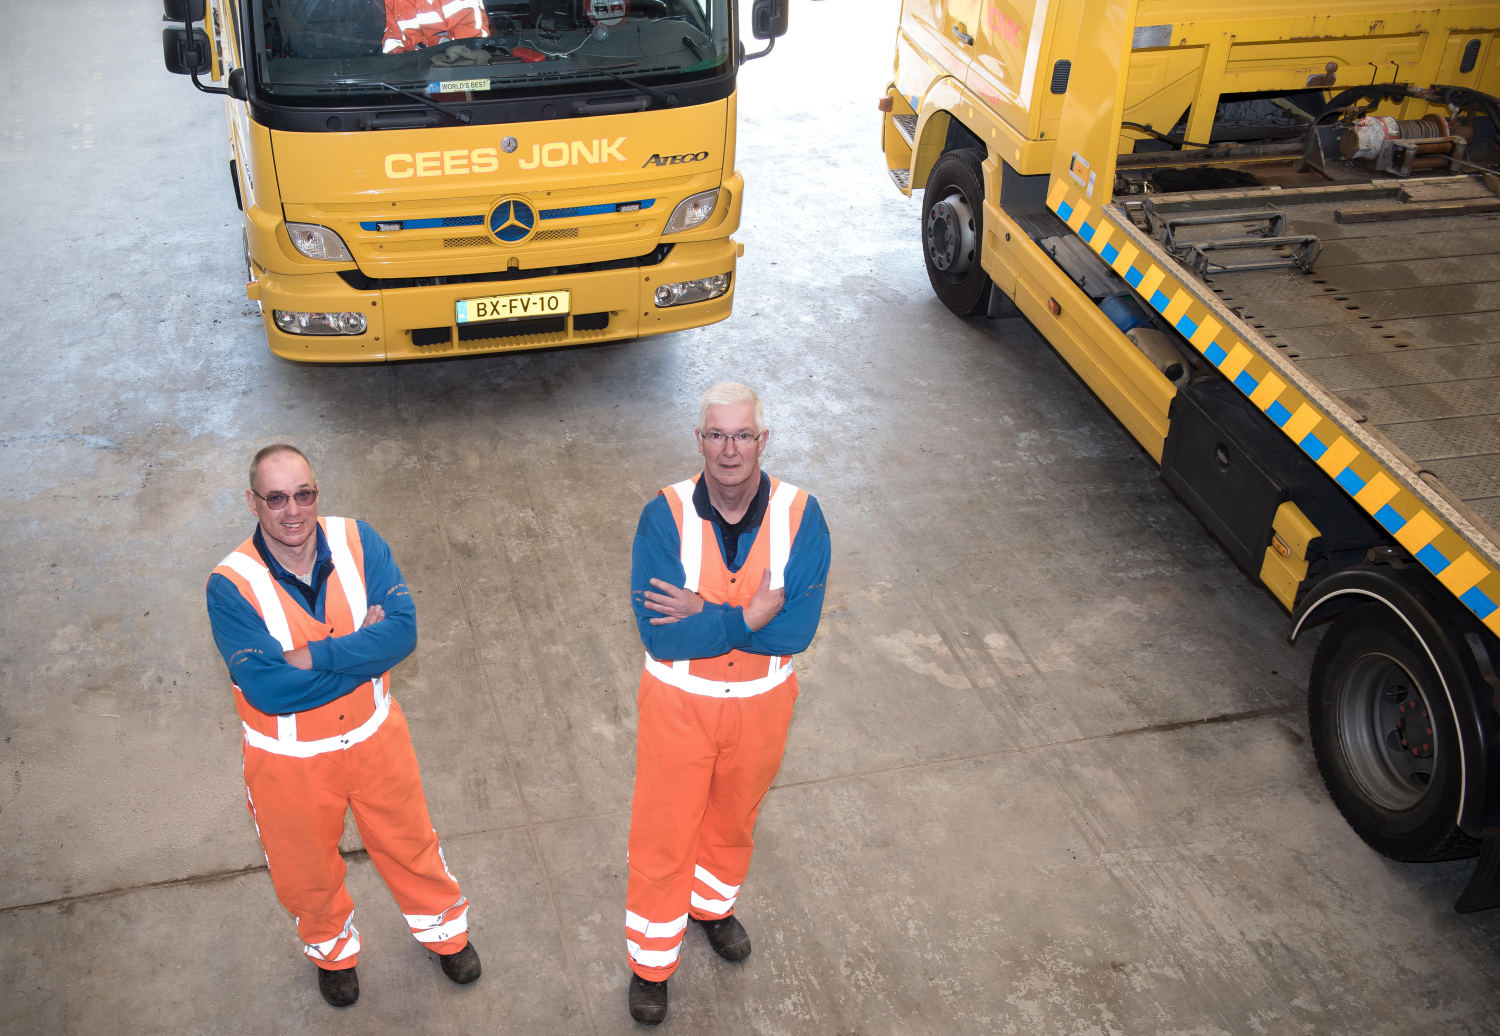 For the period 2019-2022, Dirk and Kees Jonk of Garage Transportbedrijf Cees Jonk in Purmerend will be returning as IM recovery operators in districts NH127 and NH128 (photograph: Monique Kooijman)